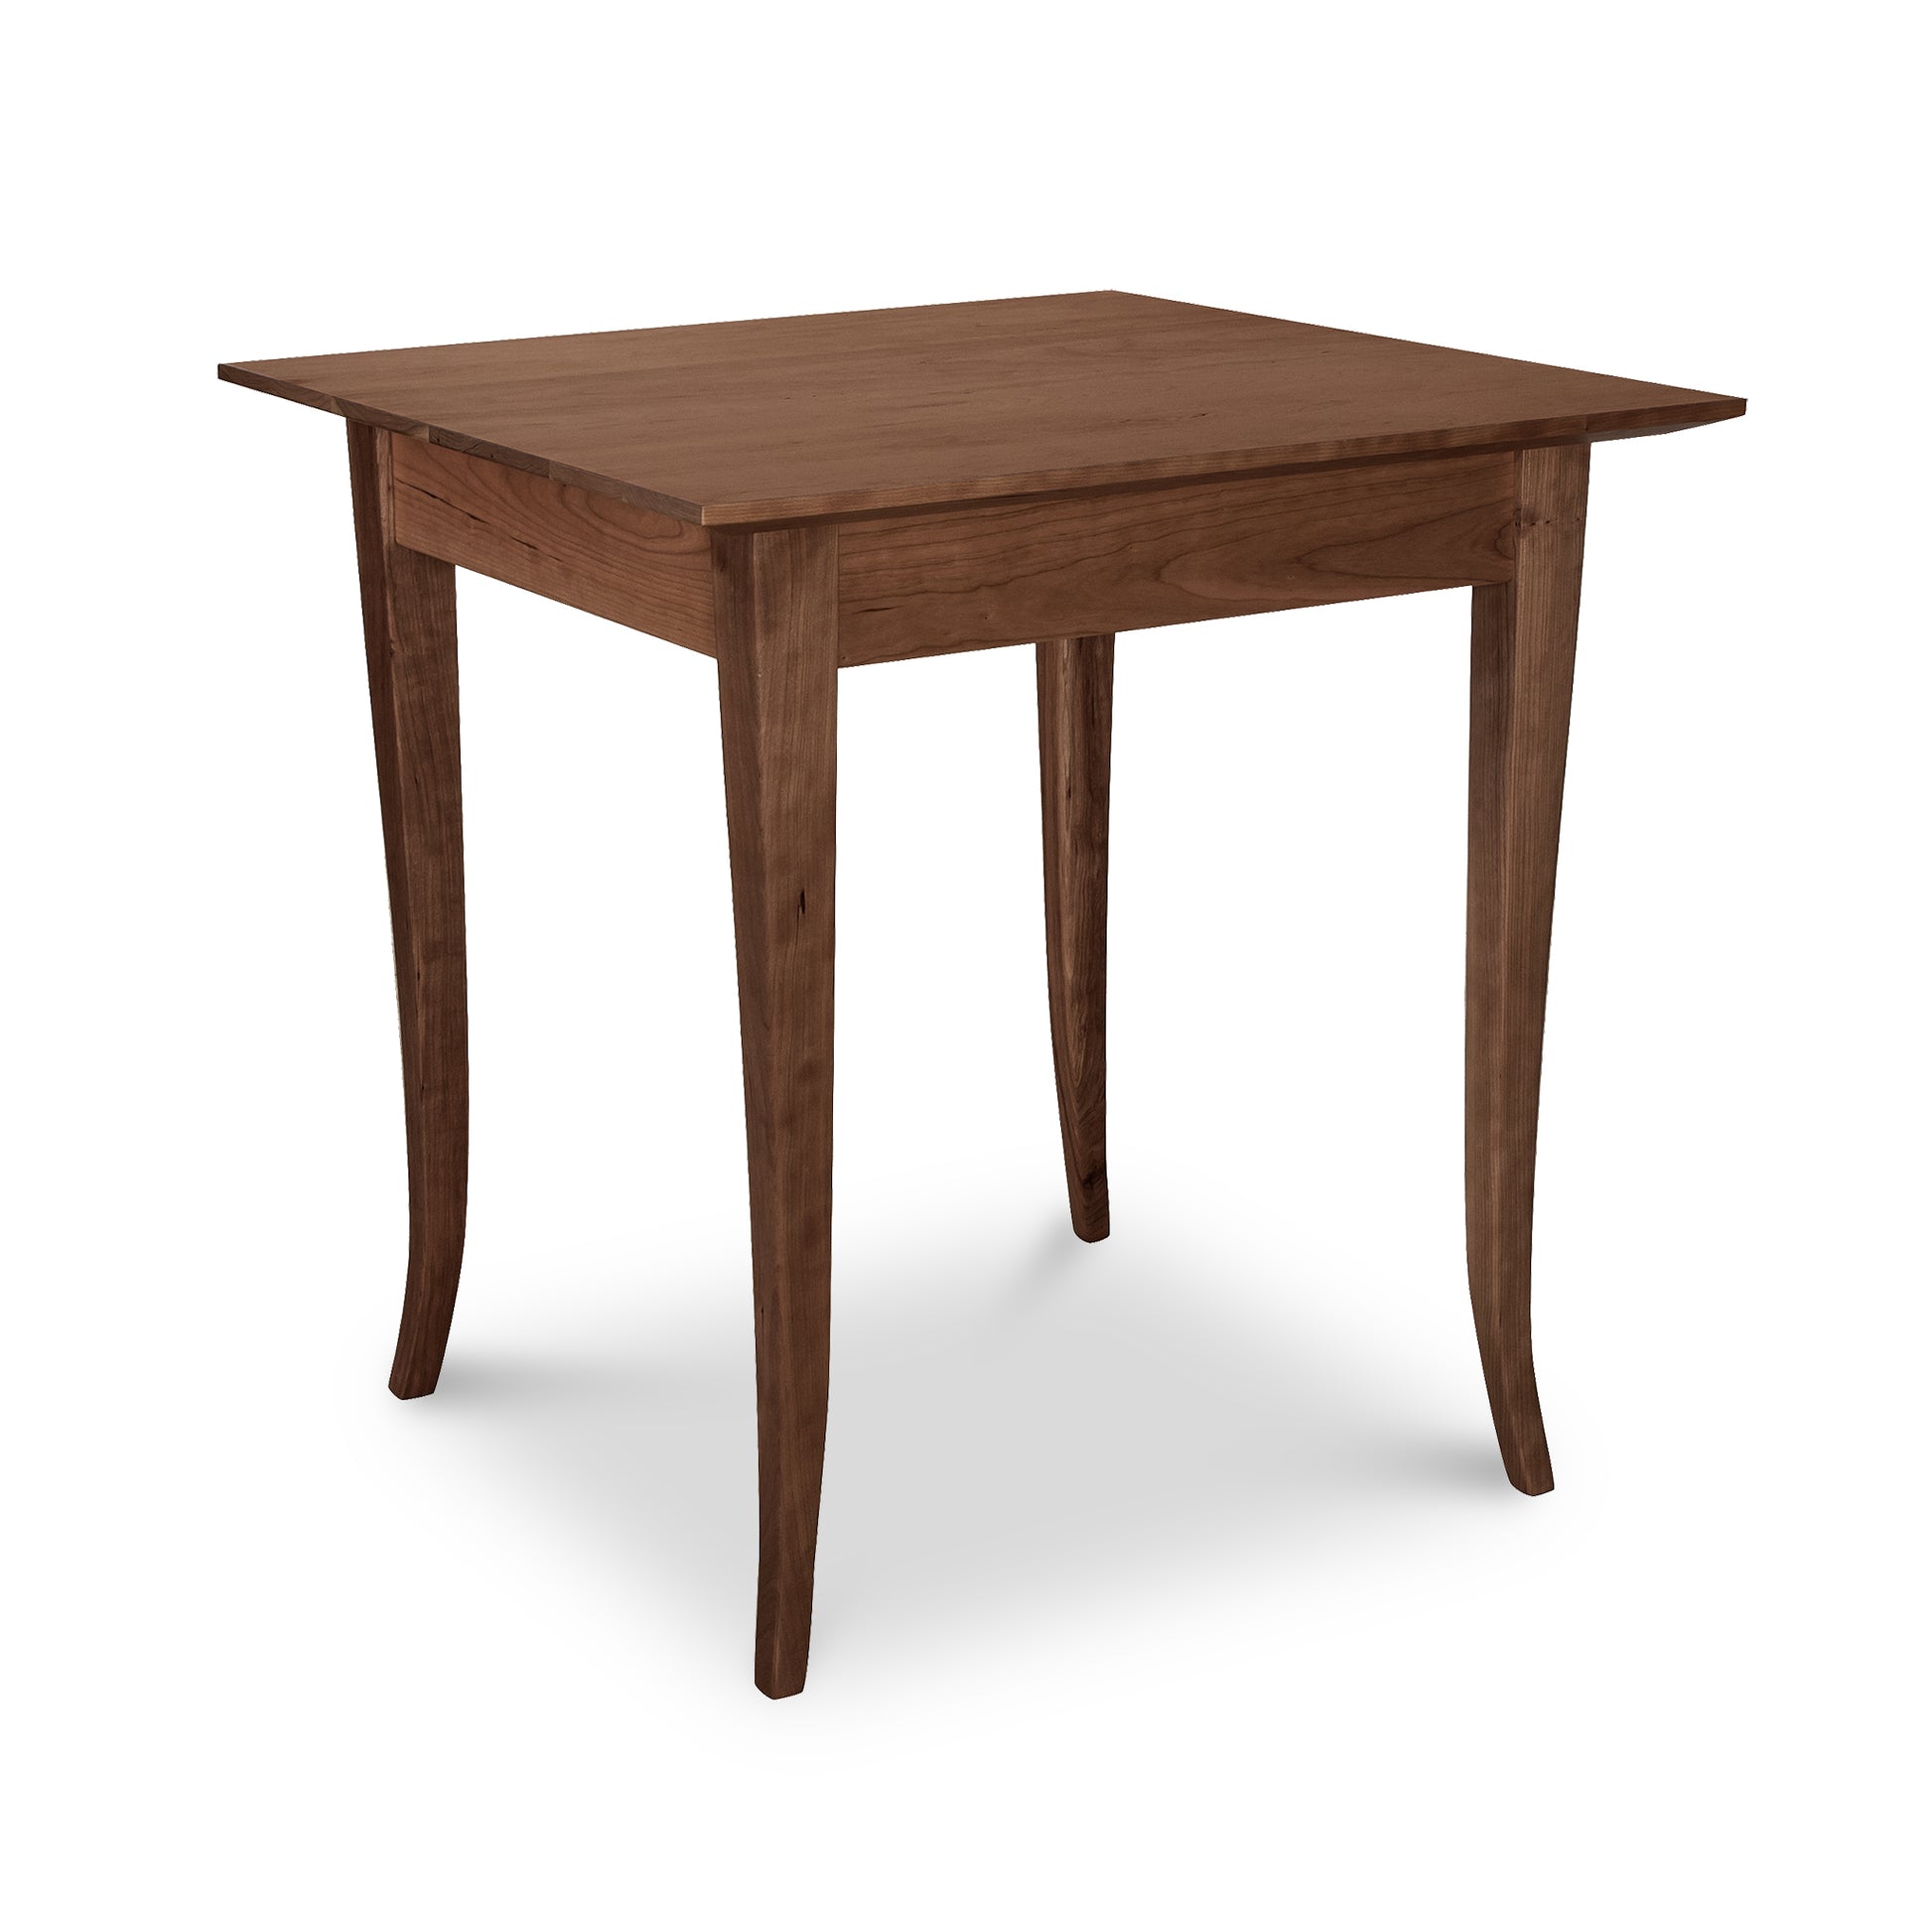 A Classic Shaker Flare Leg Square Solid Top Table handcrafted in Vermont from solid hardwoods, featuring a wooden top and legs, by Lyndon Furniture.